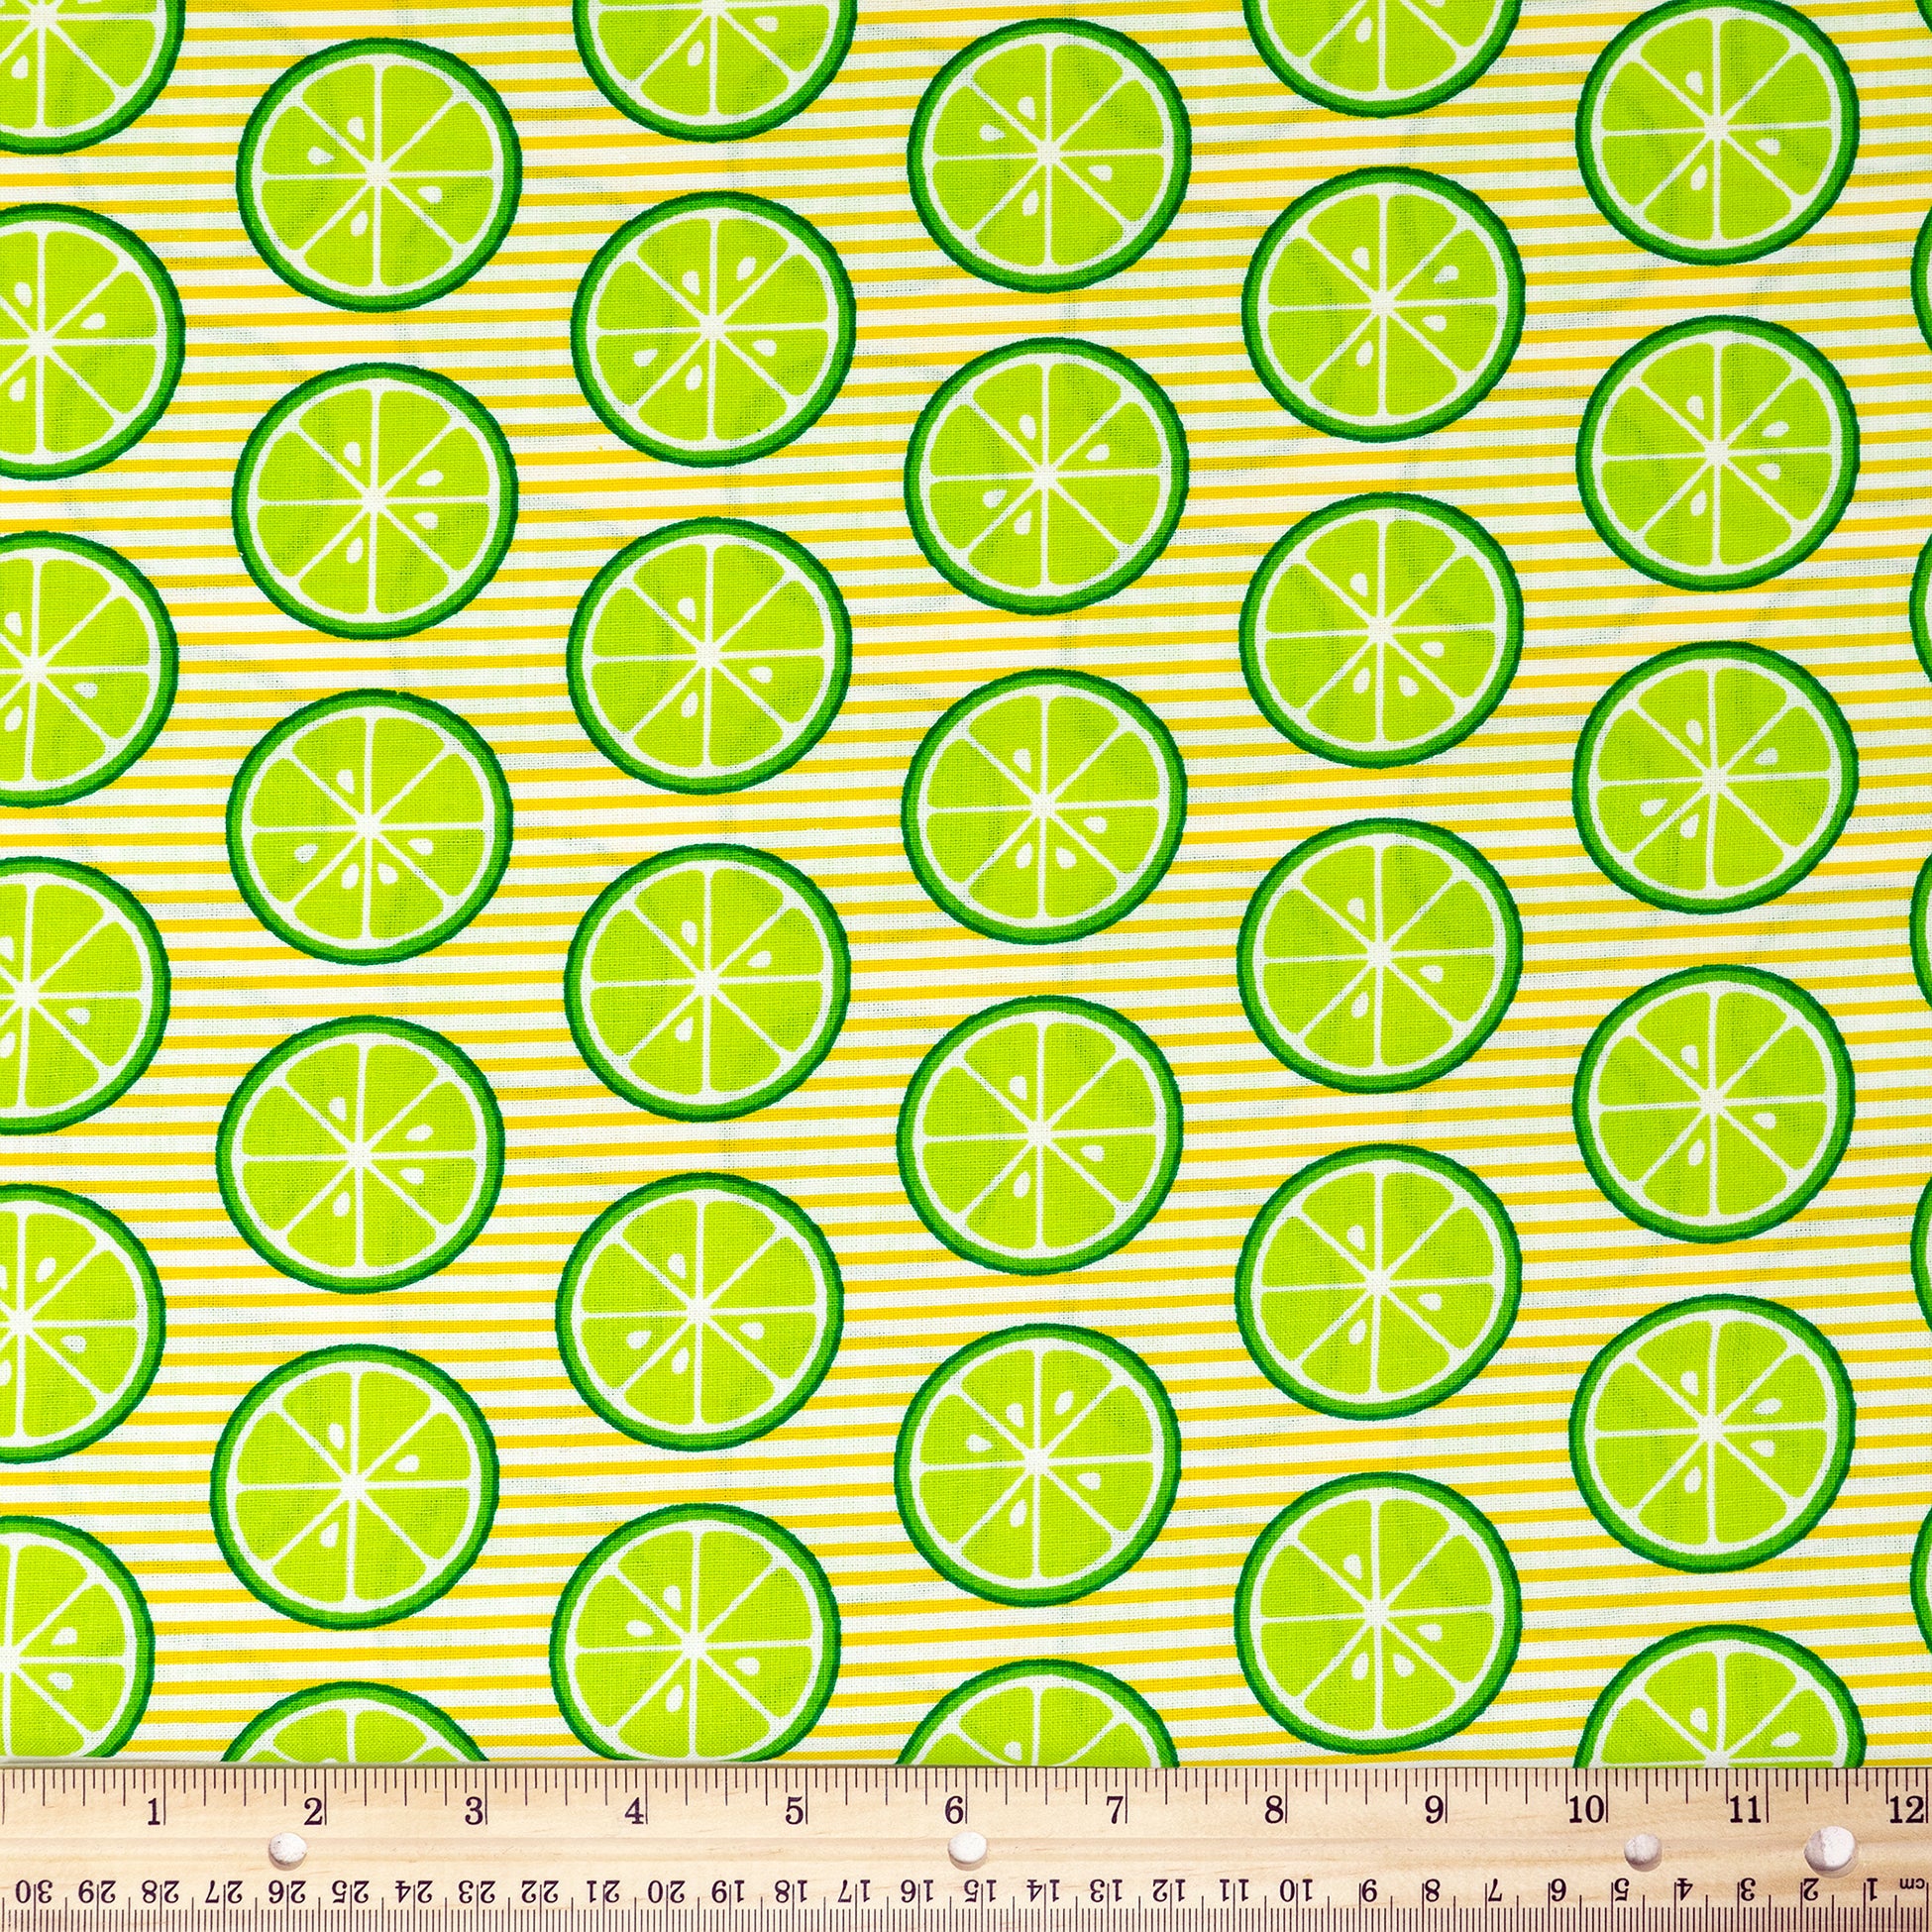 Waverly Inspirations Cotton 44" Lemon Slice Sun Color Sewing Fabric by the Yard